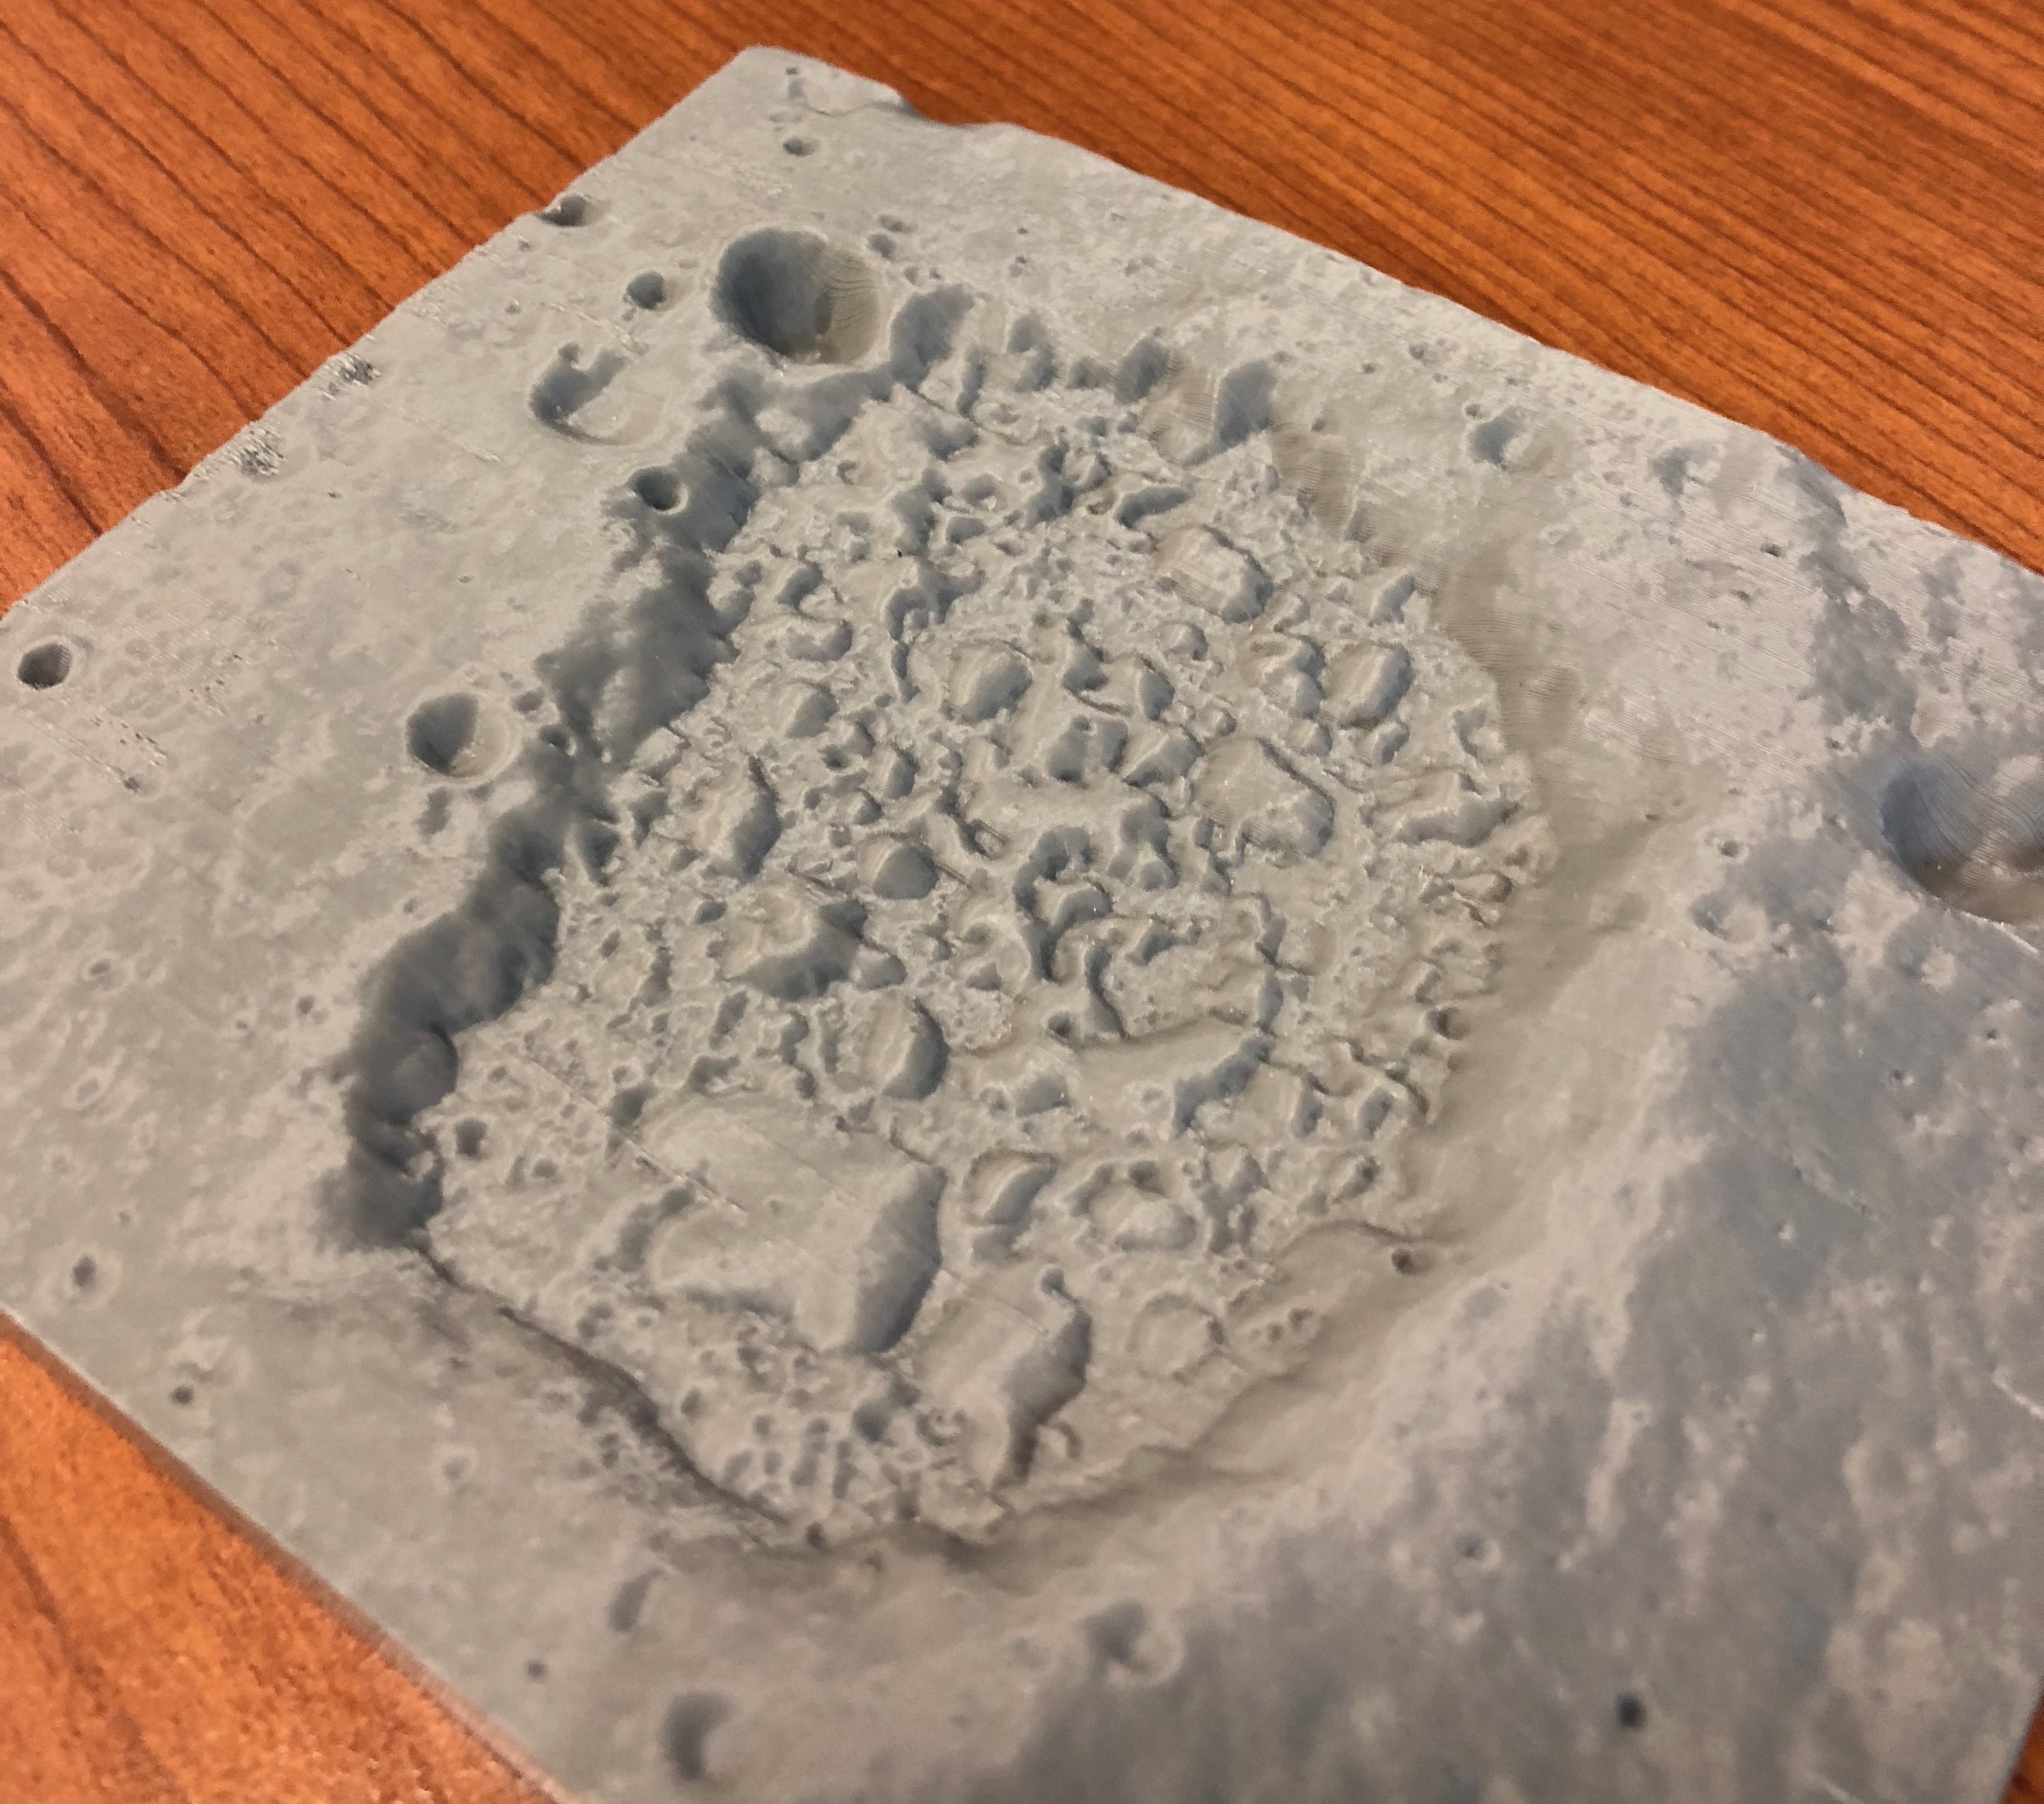 Photo of a 3D printed model of volcanic landform on the Moon